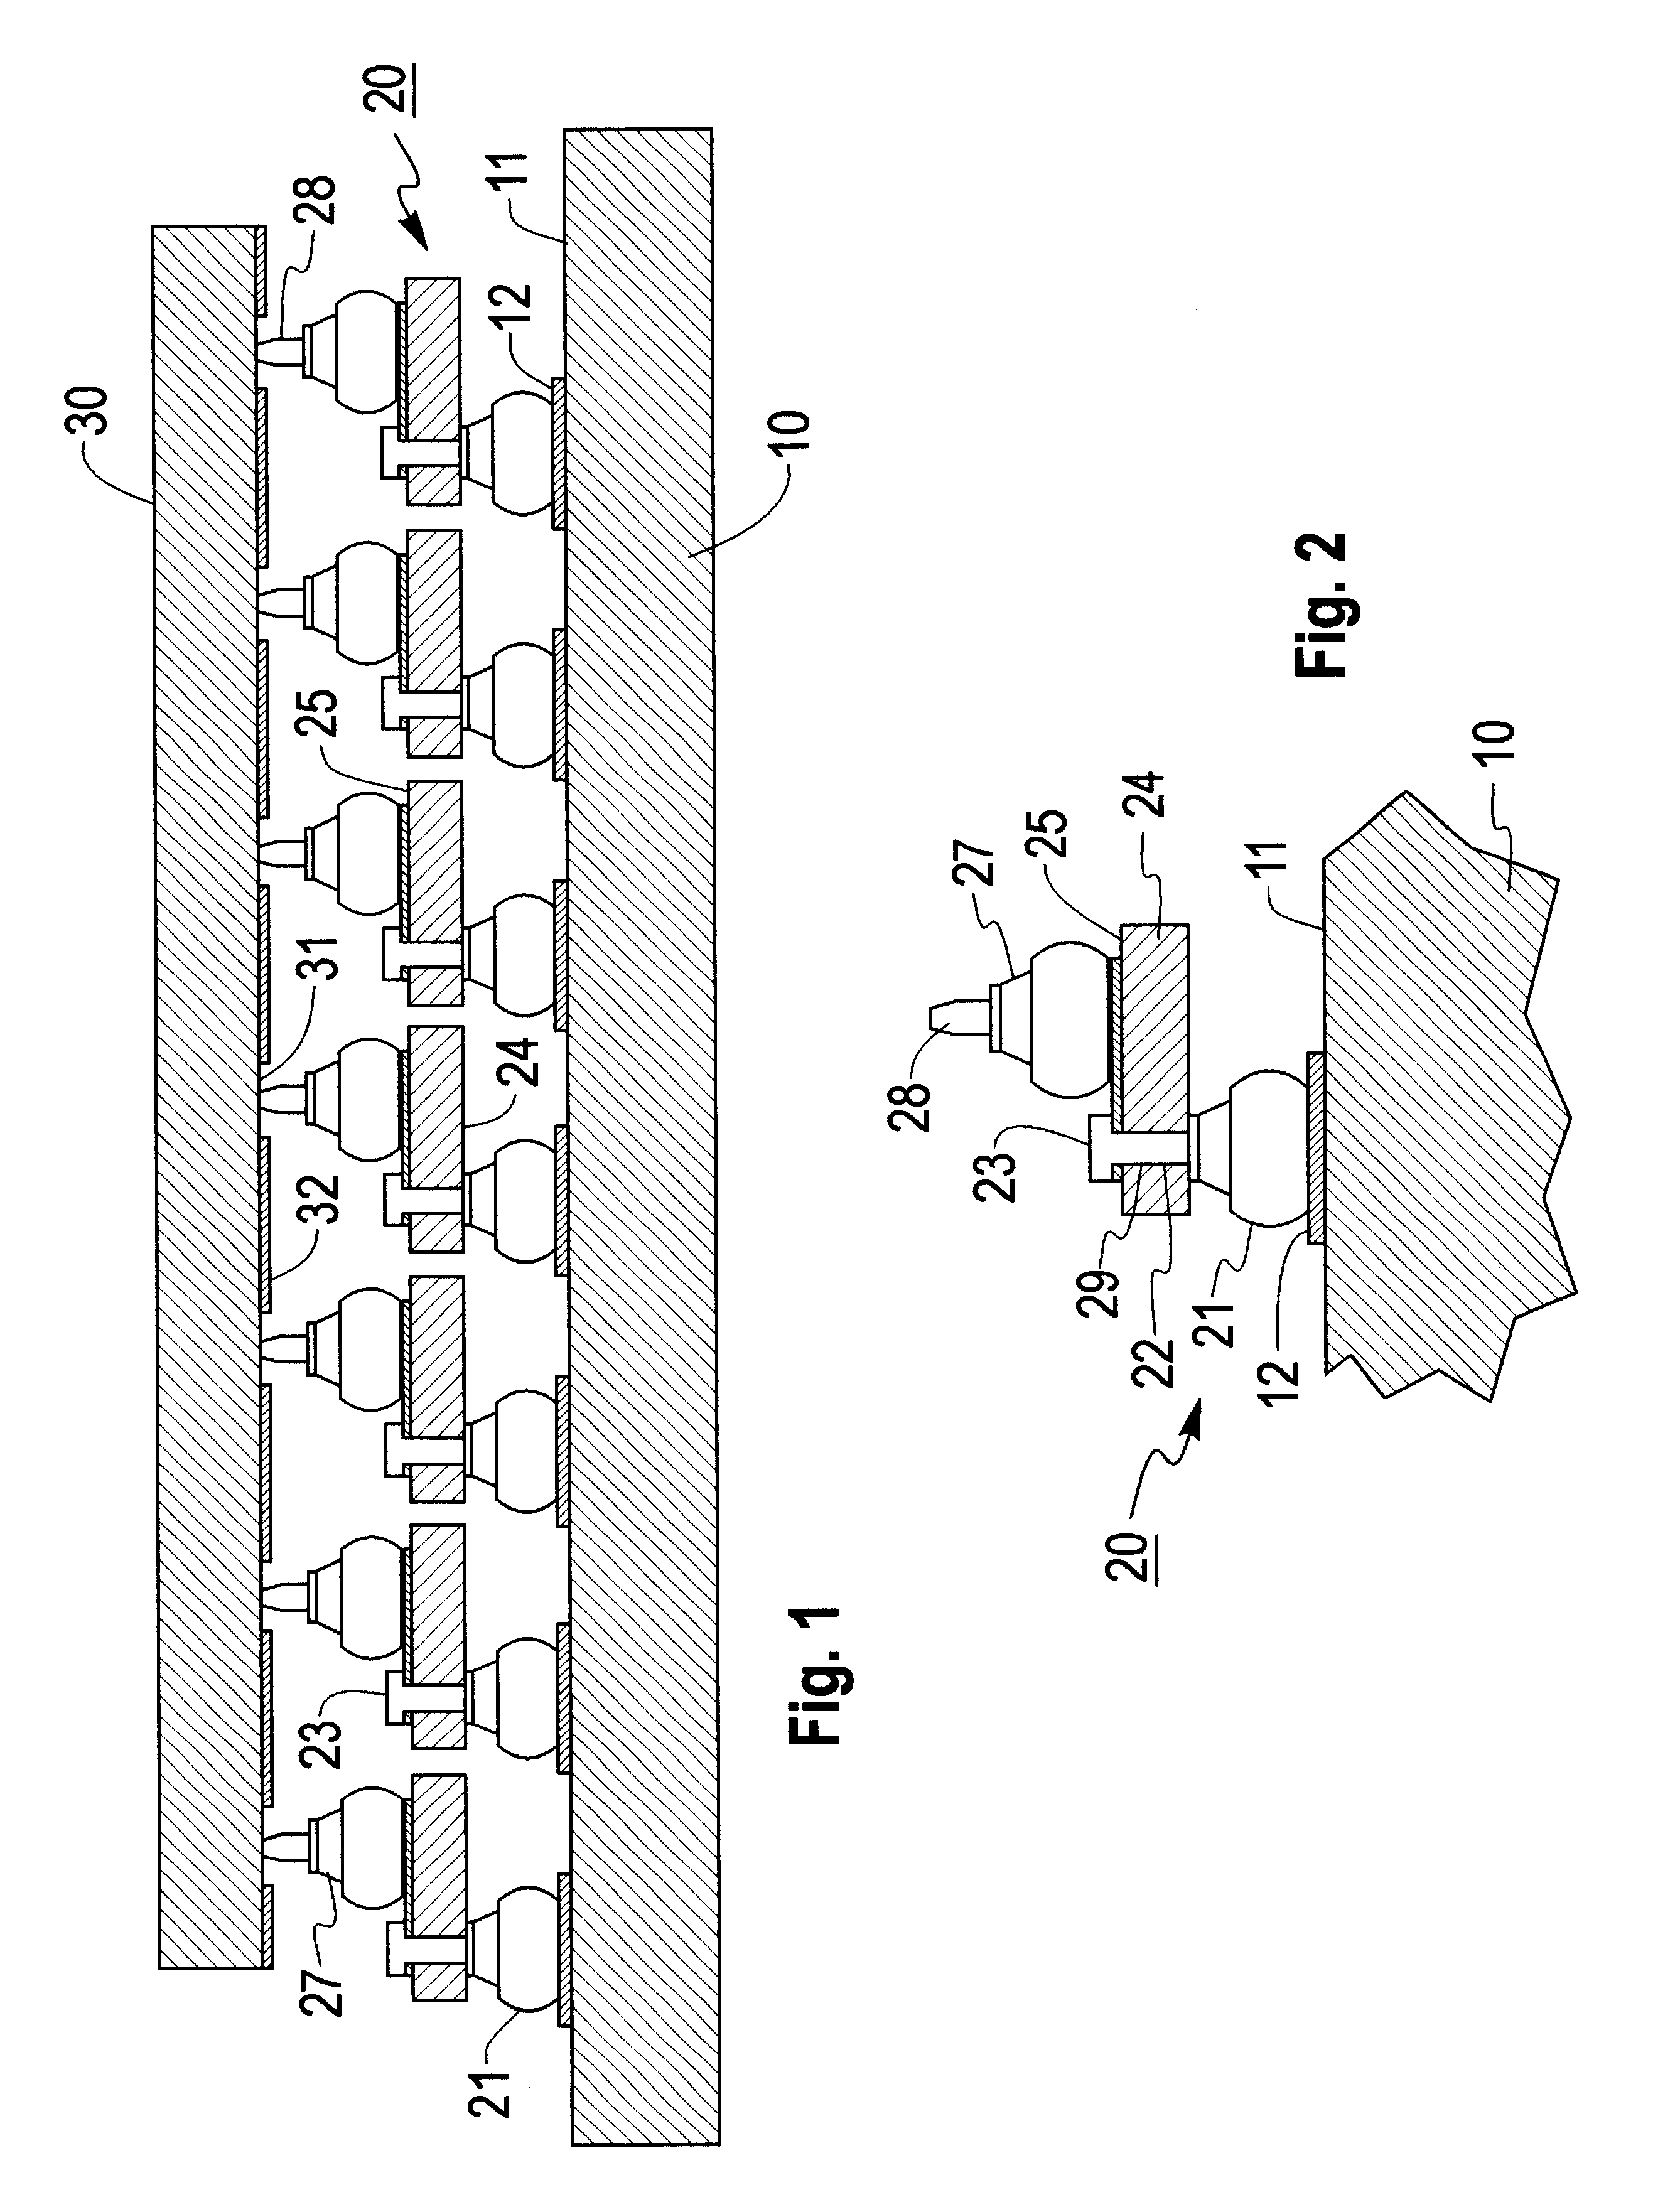 High density cantilevered probe for electronic devices